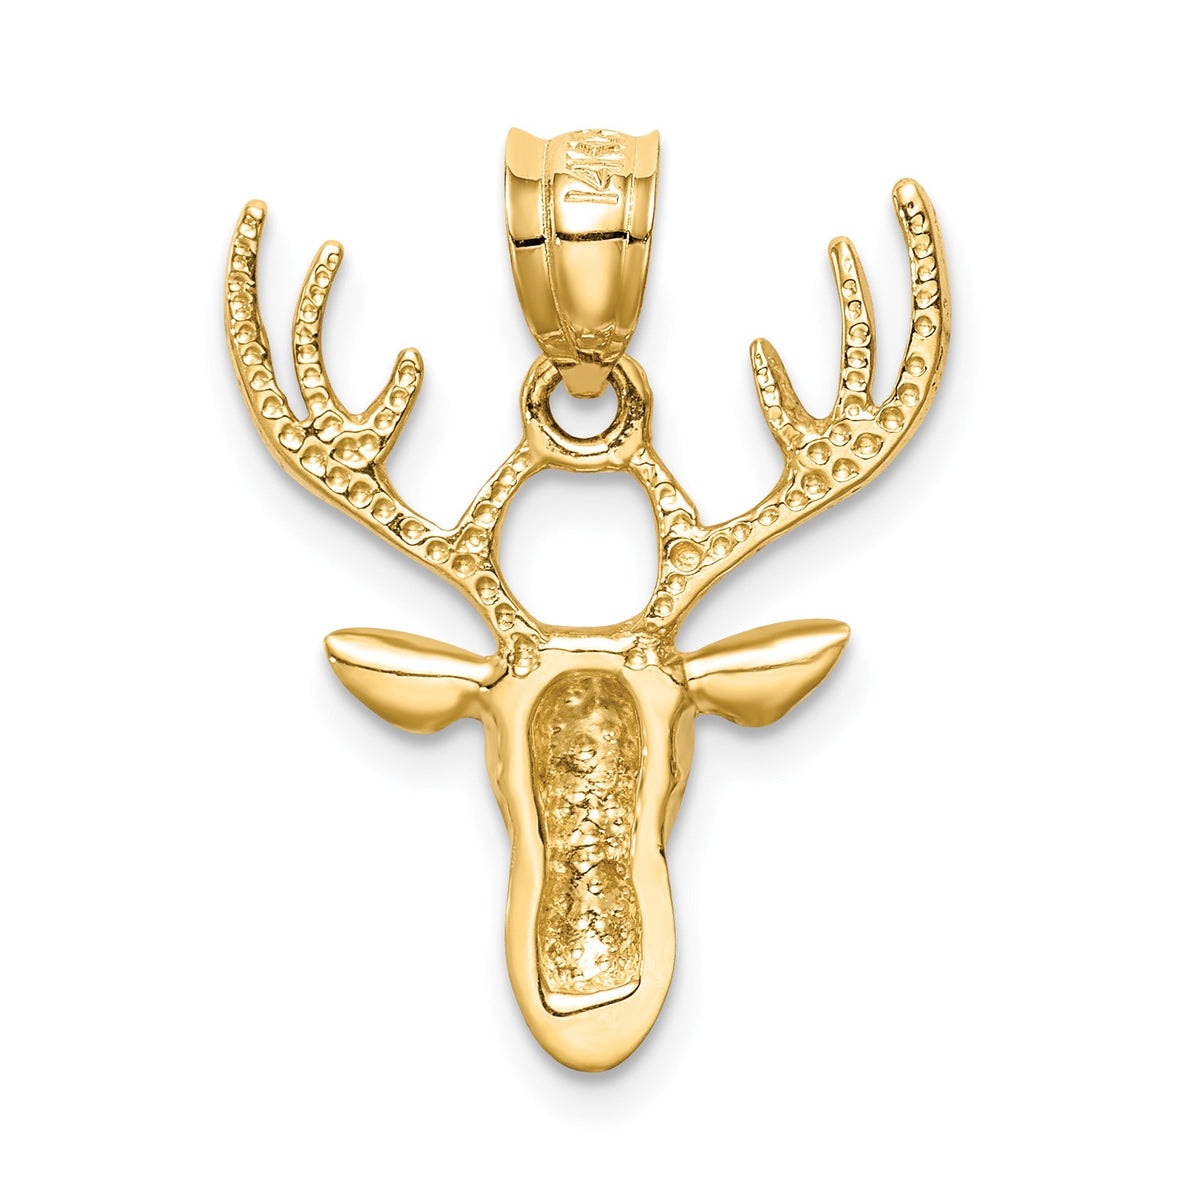 Alternate view of the 14k Yellow Gold Polished Deer Head Pendant, 18mm by The Black Bow Jewelry Co.